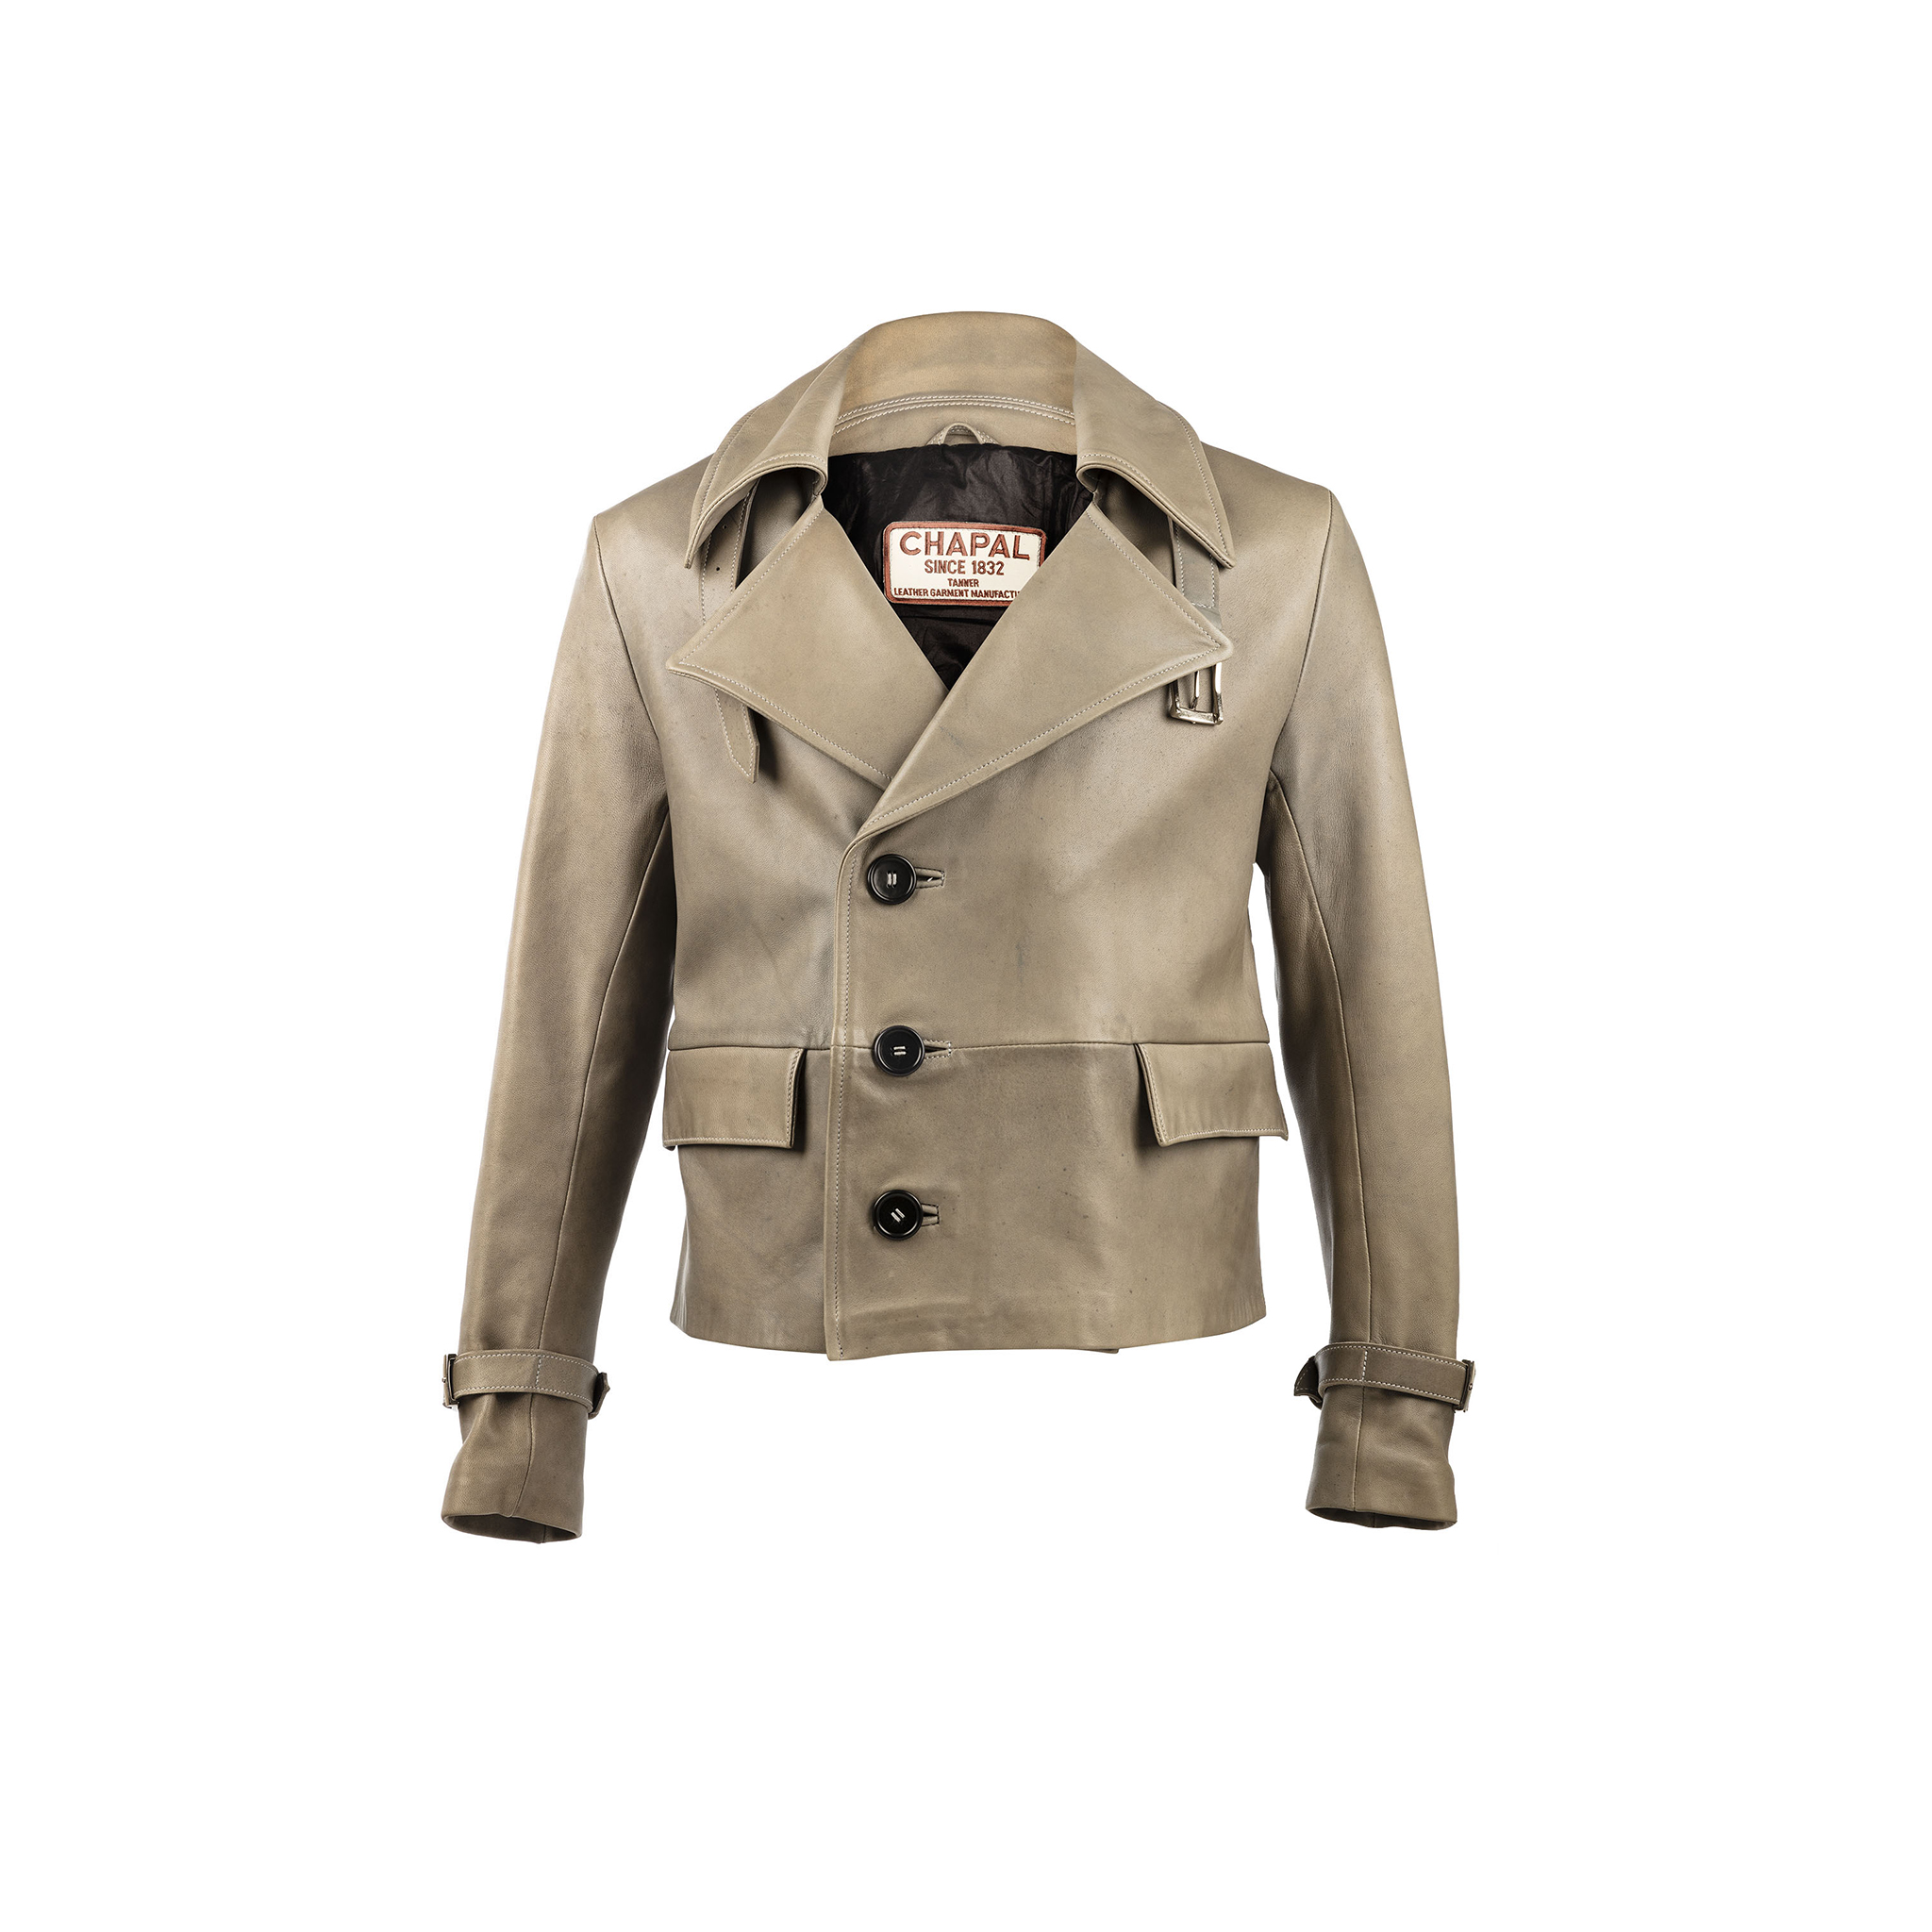 Peacoat Short Version Jacket - Glossy leather - Grey color